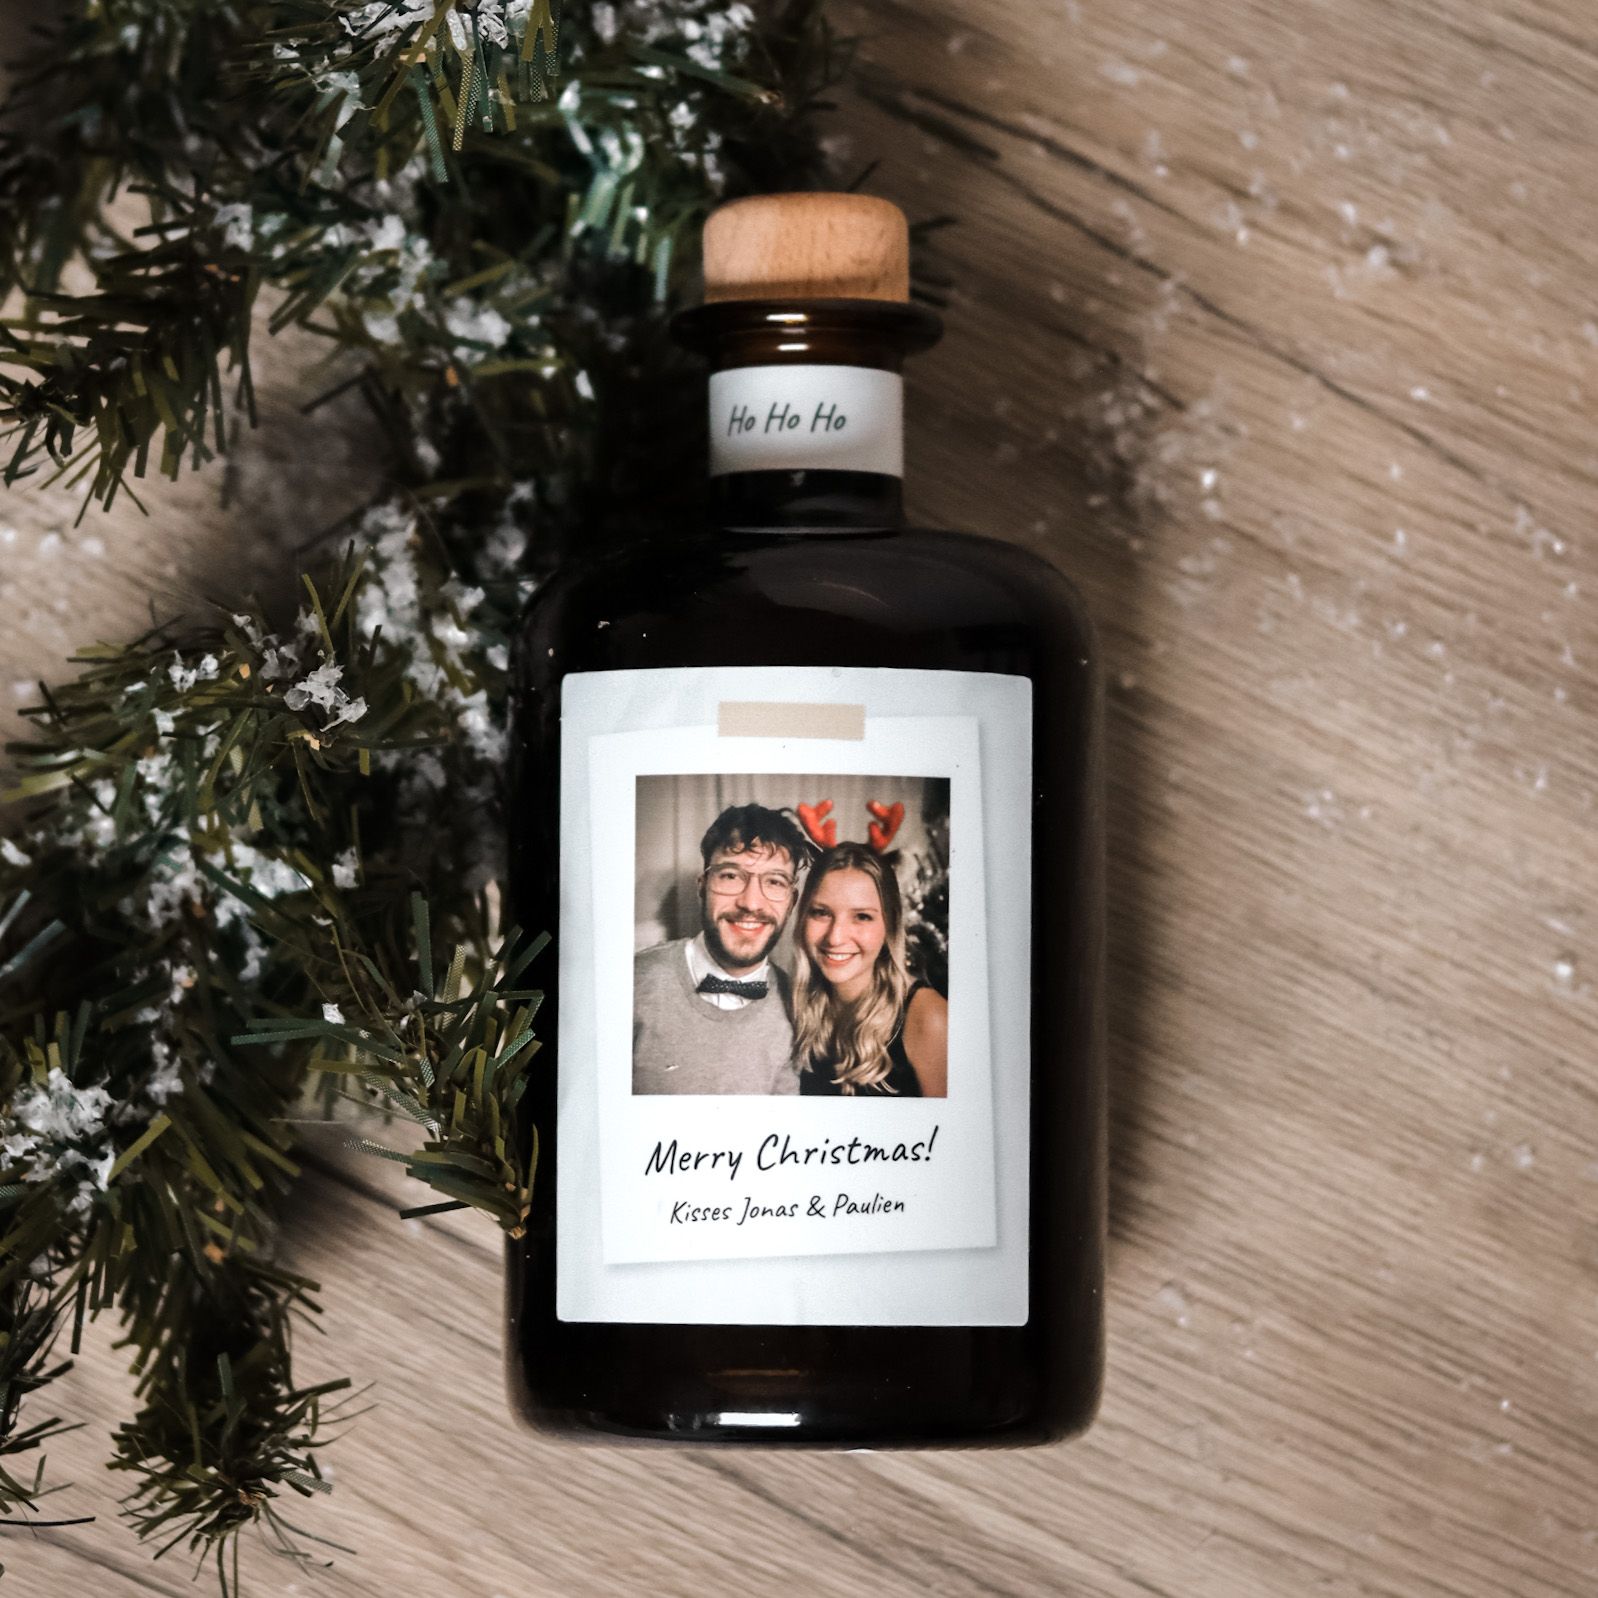 Personalised olive oil merry Christmas photo